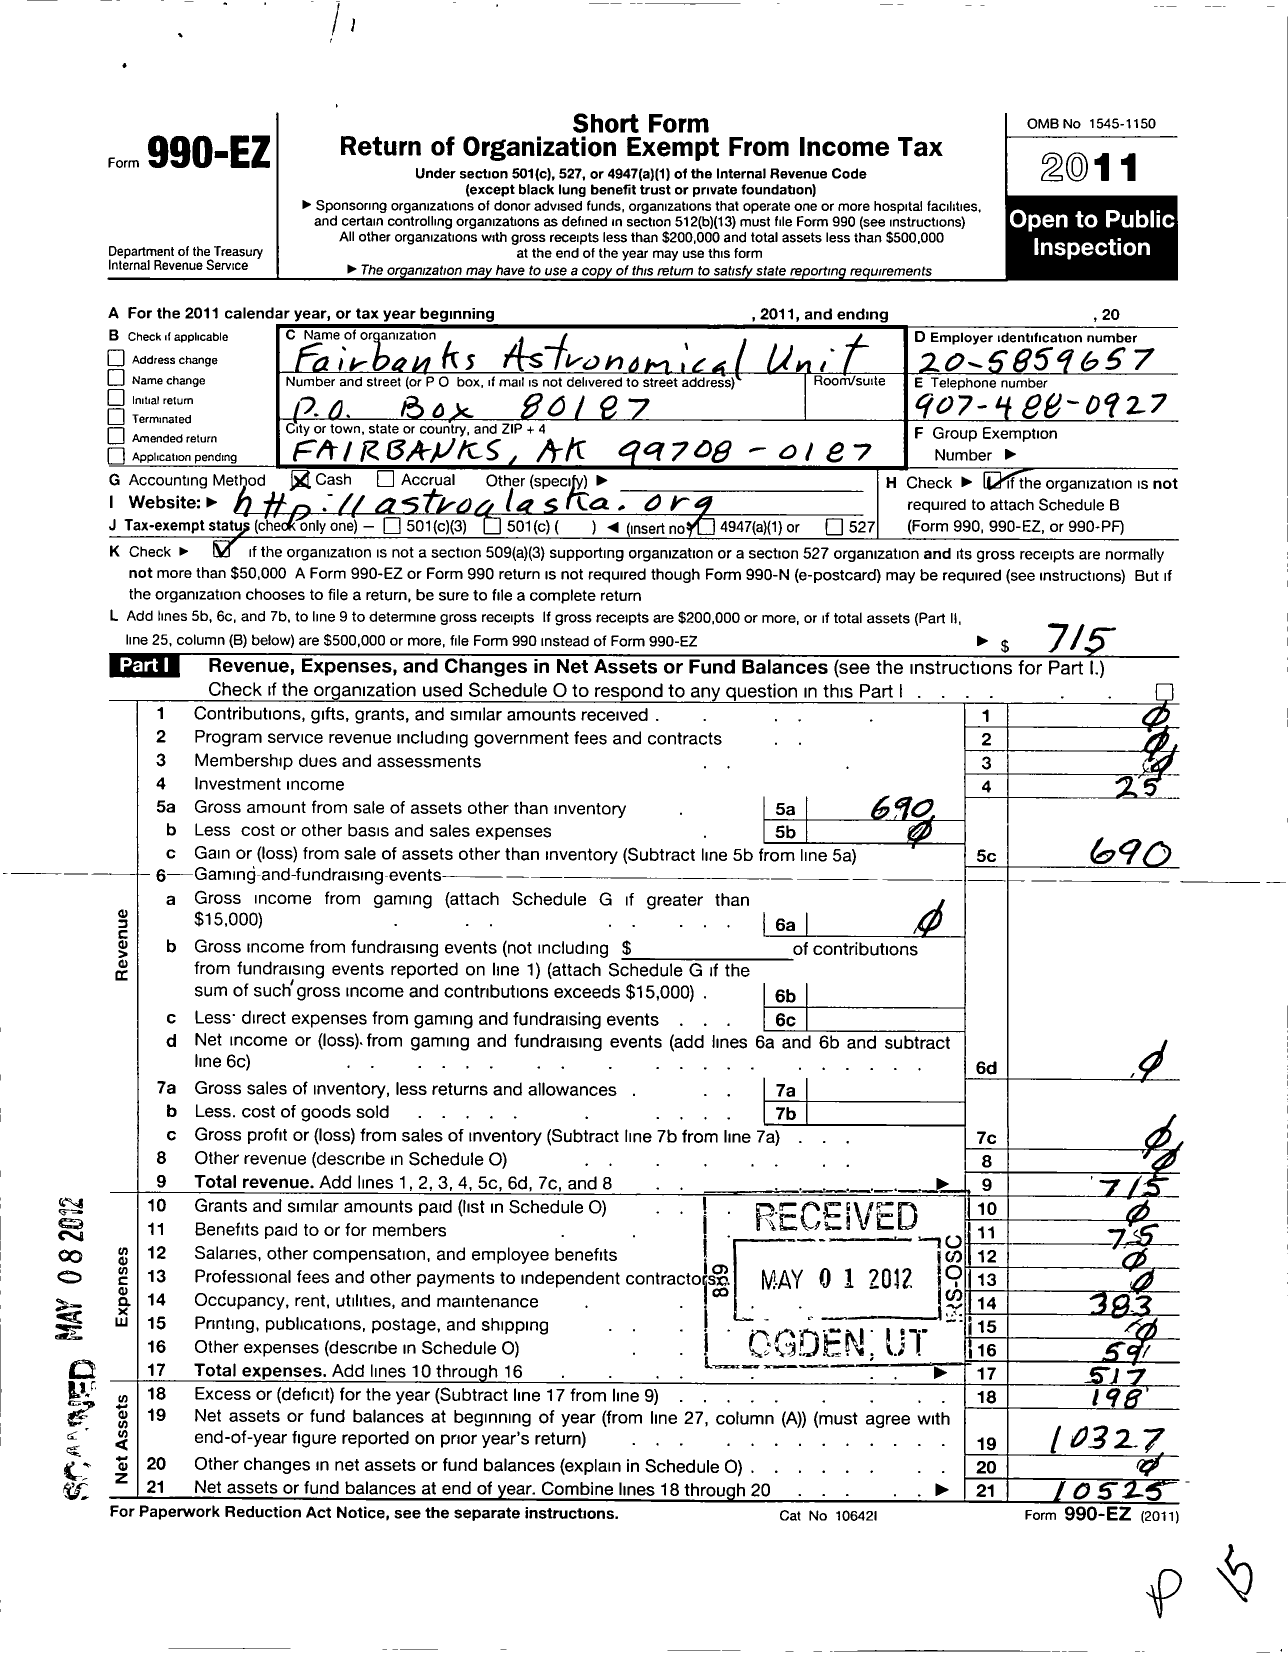 Image of first page of 2011 Form 990EZ for Fairbanks Astronomical Unit